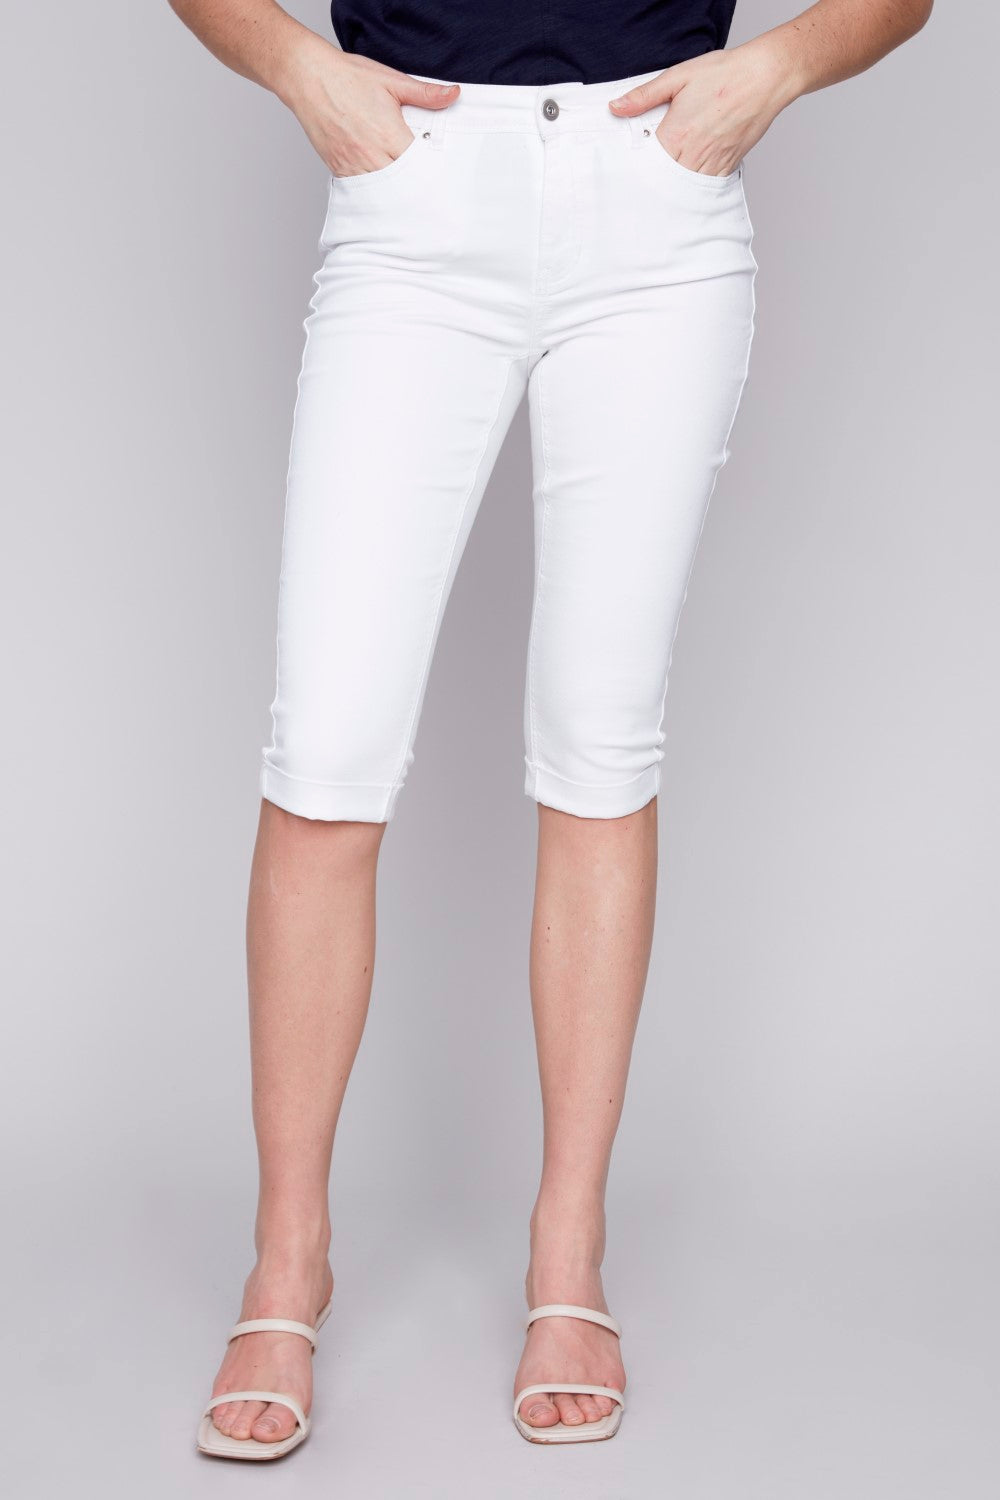 Charlie B Stretch Twill Pedal Pusher Pants C5208Y-618A-002 White